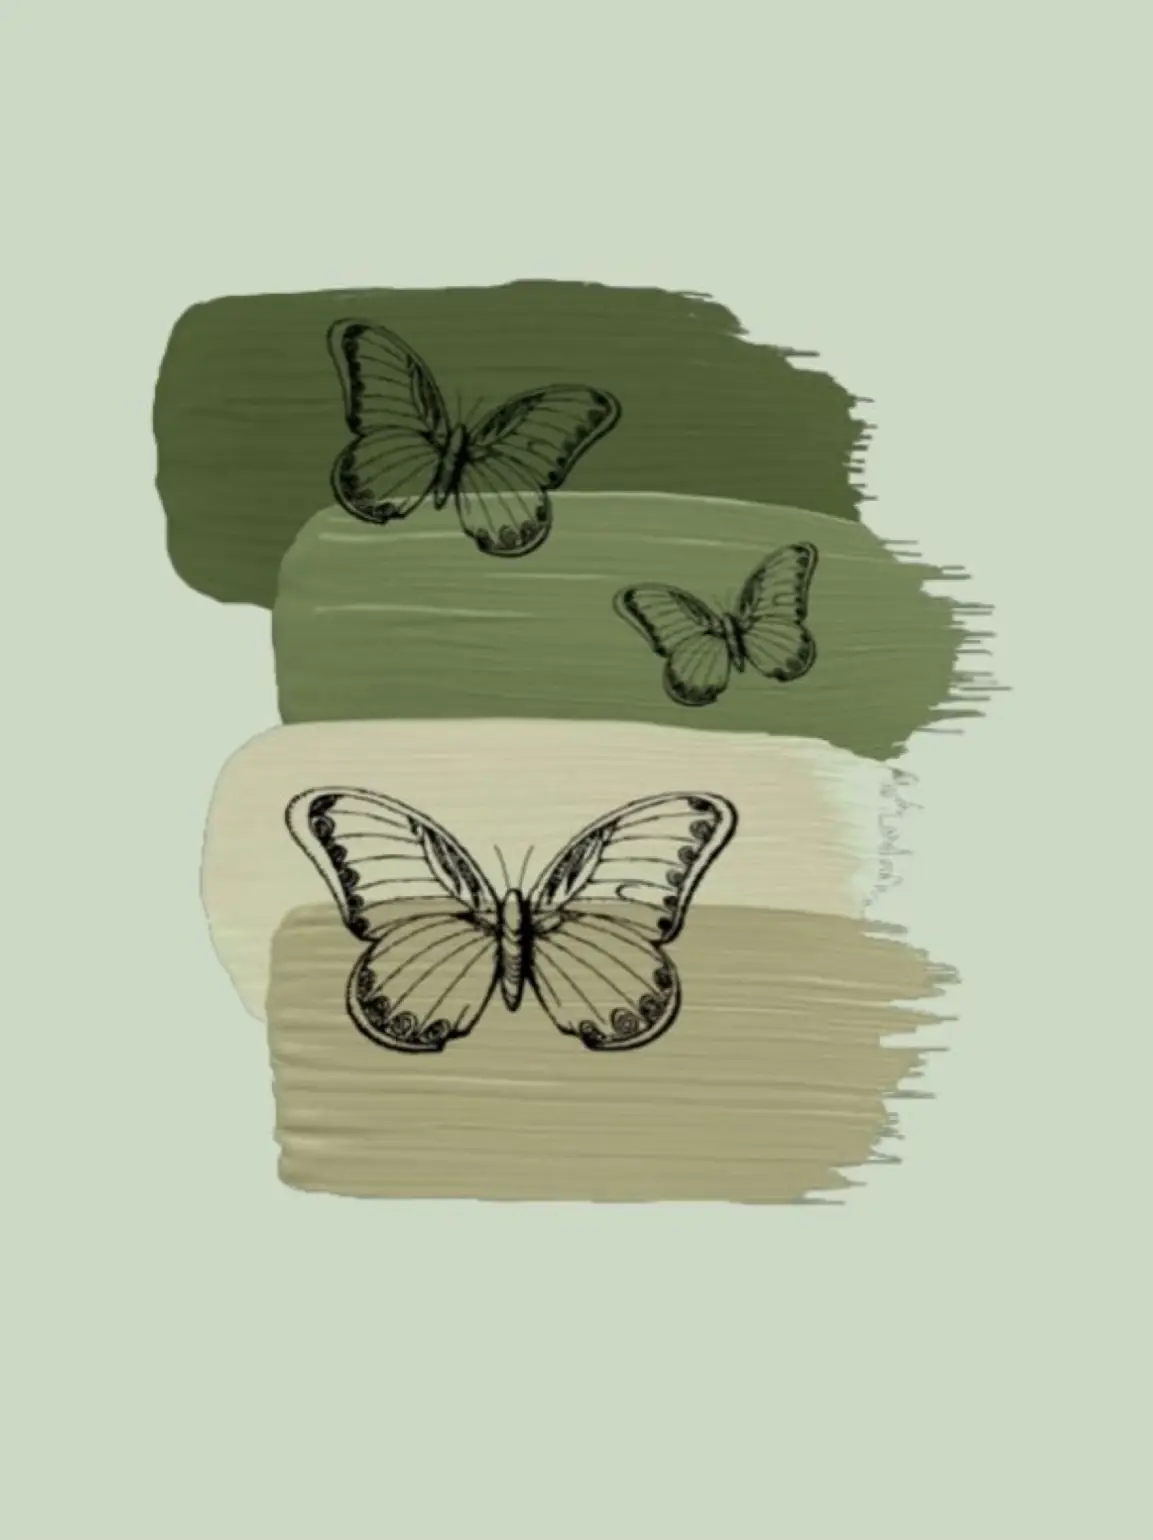  A painting of four butterflies in a row.